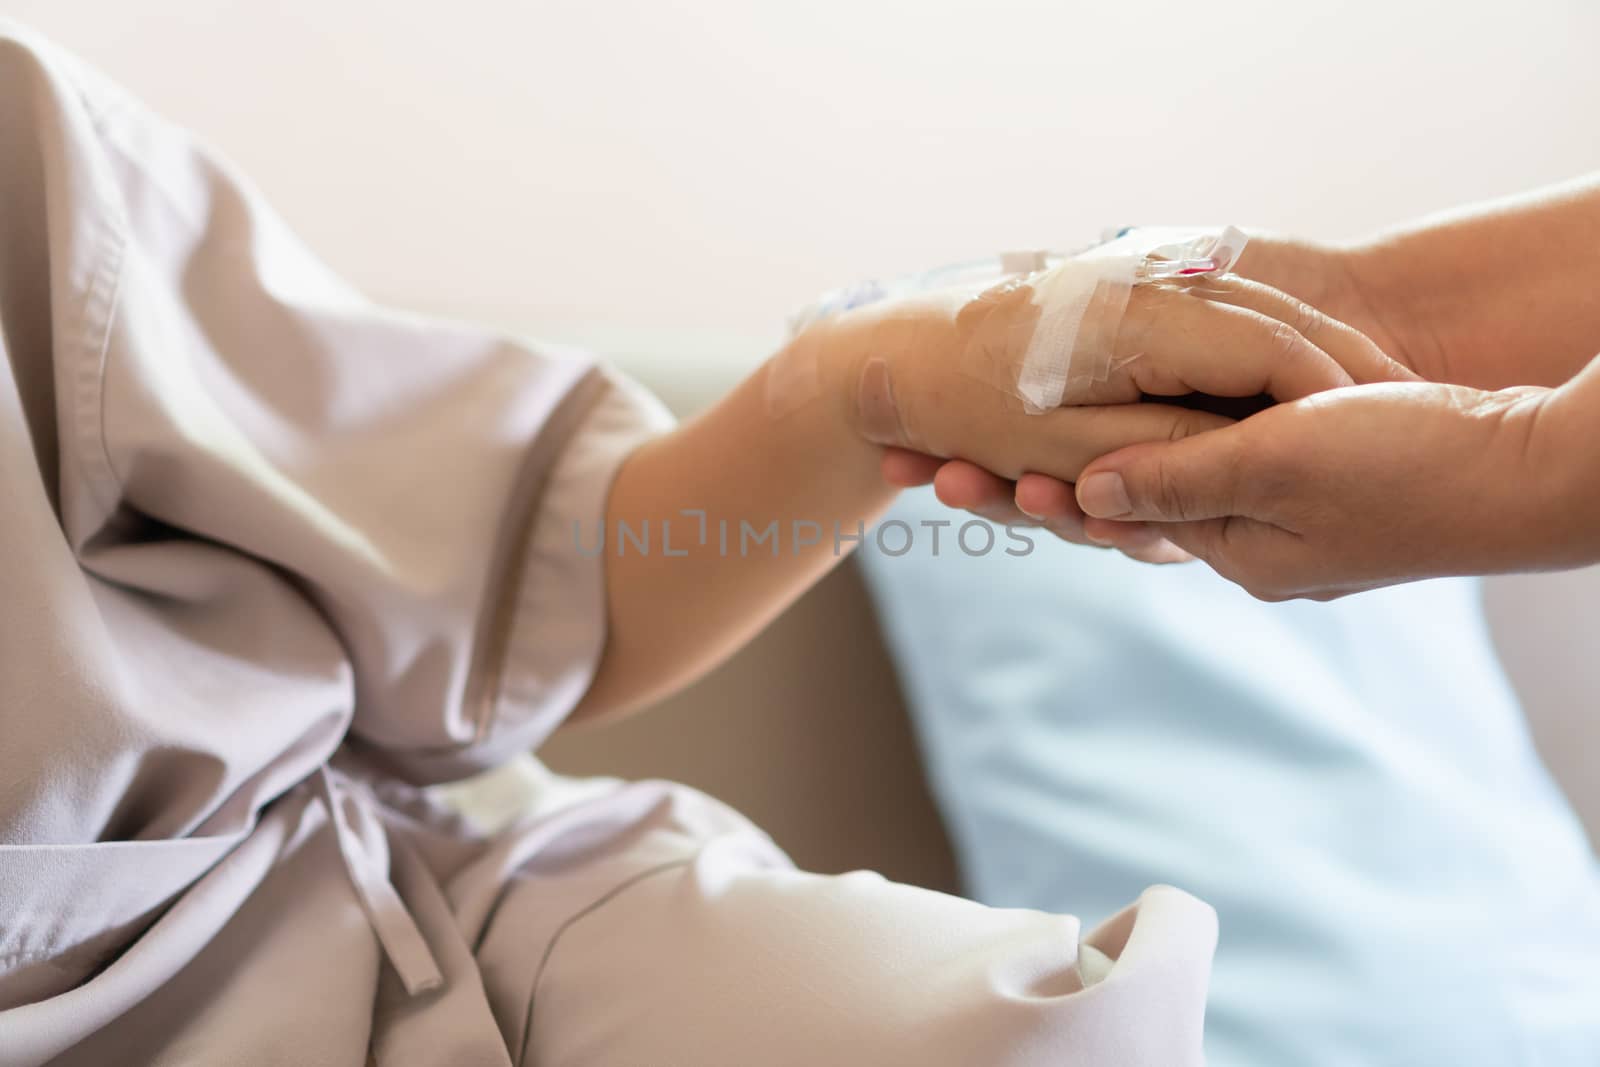 Love hope concept: Daughter Visits mother holding hand for recov by smolaw11